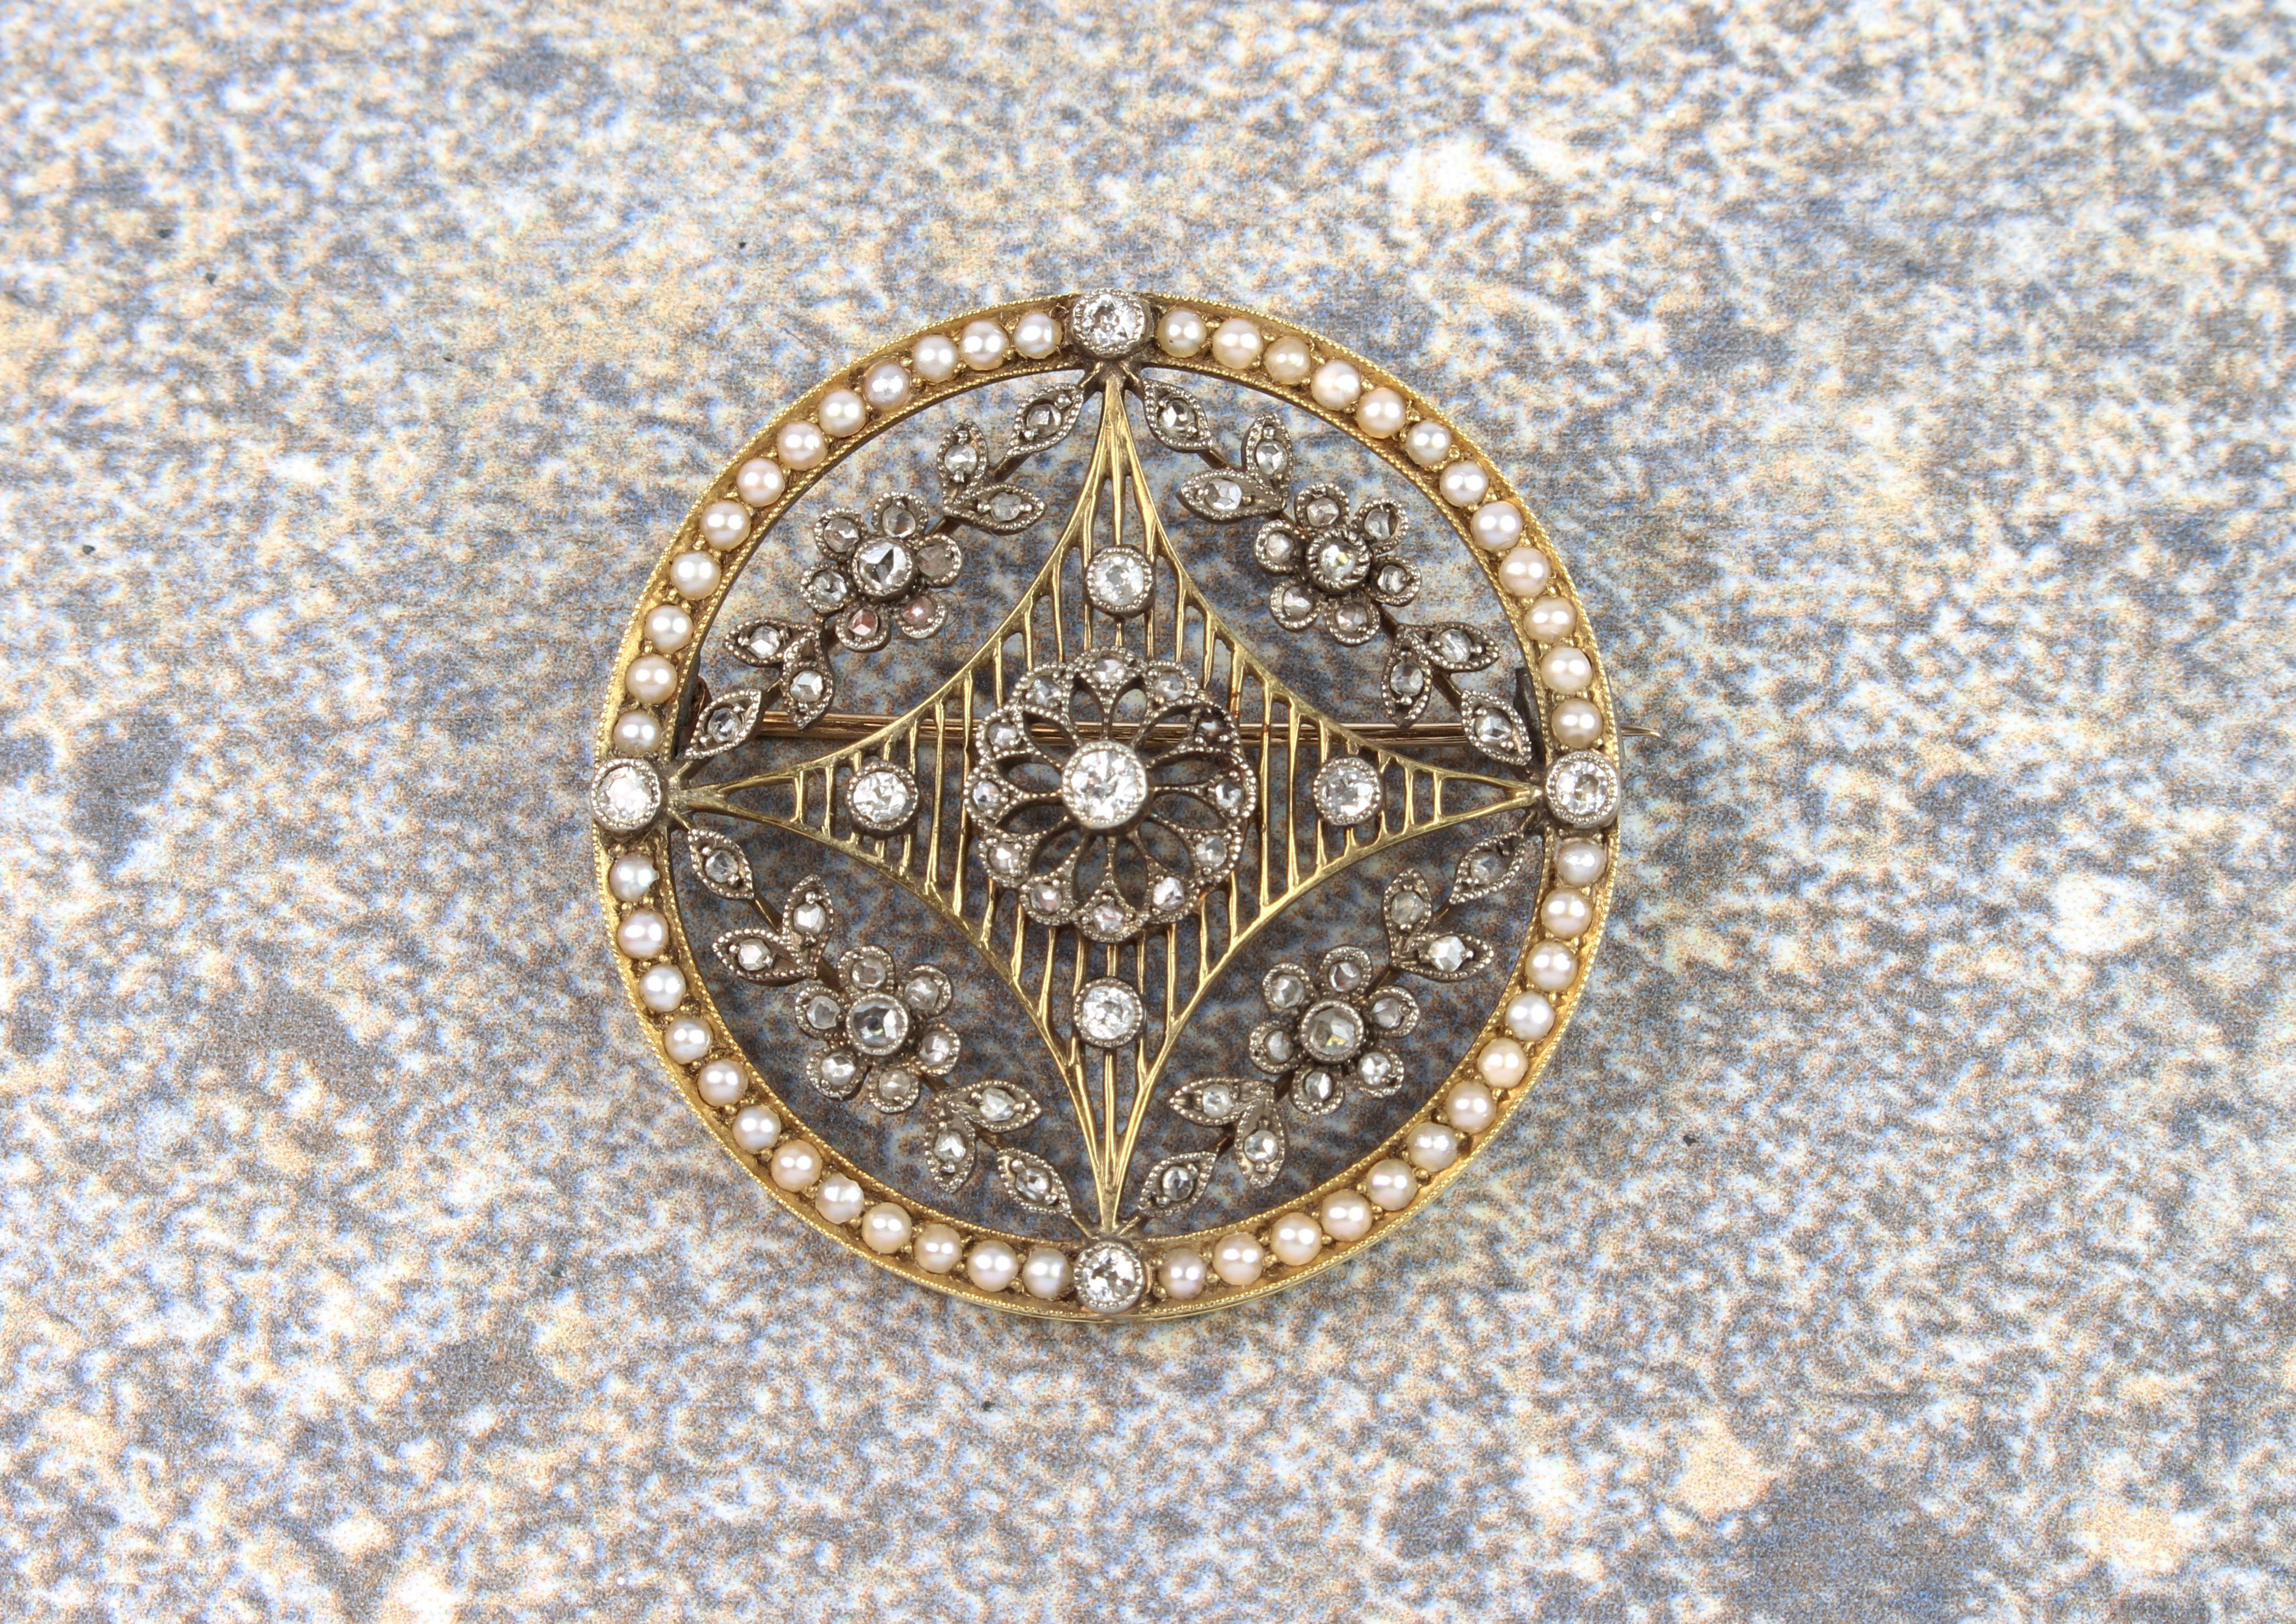 A fine Edwardian Belle Epoque 18ct gold, silver, seed pearl and diamond target brooch - unmarked but - Image 2 of 4